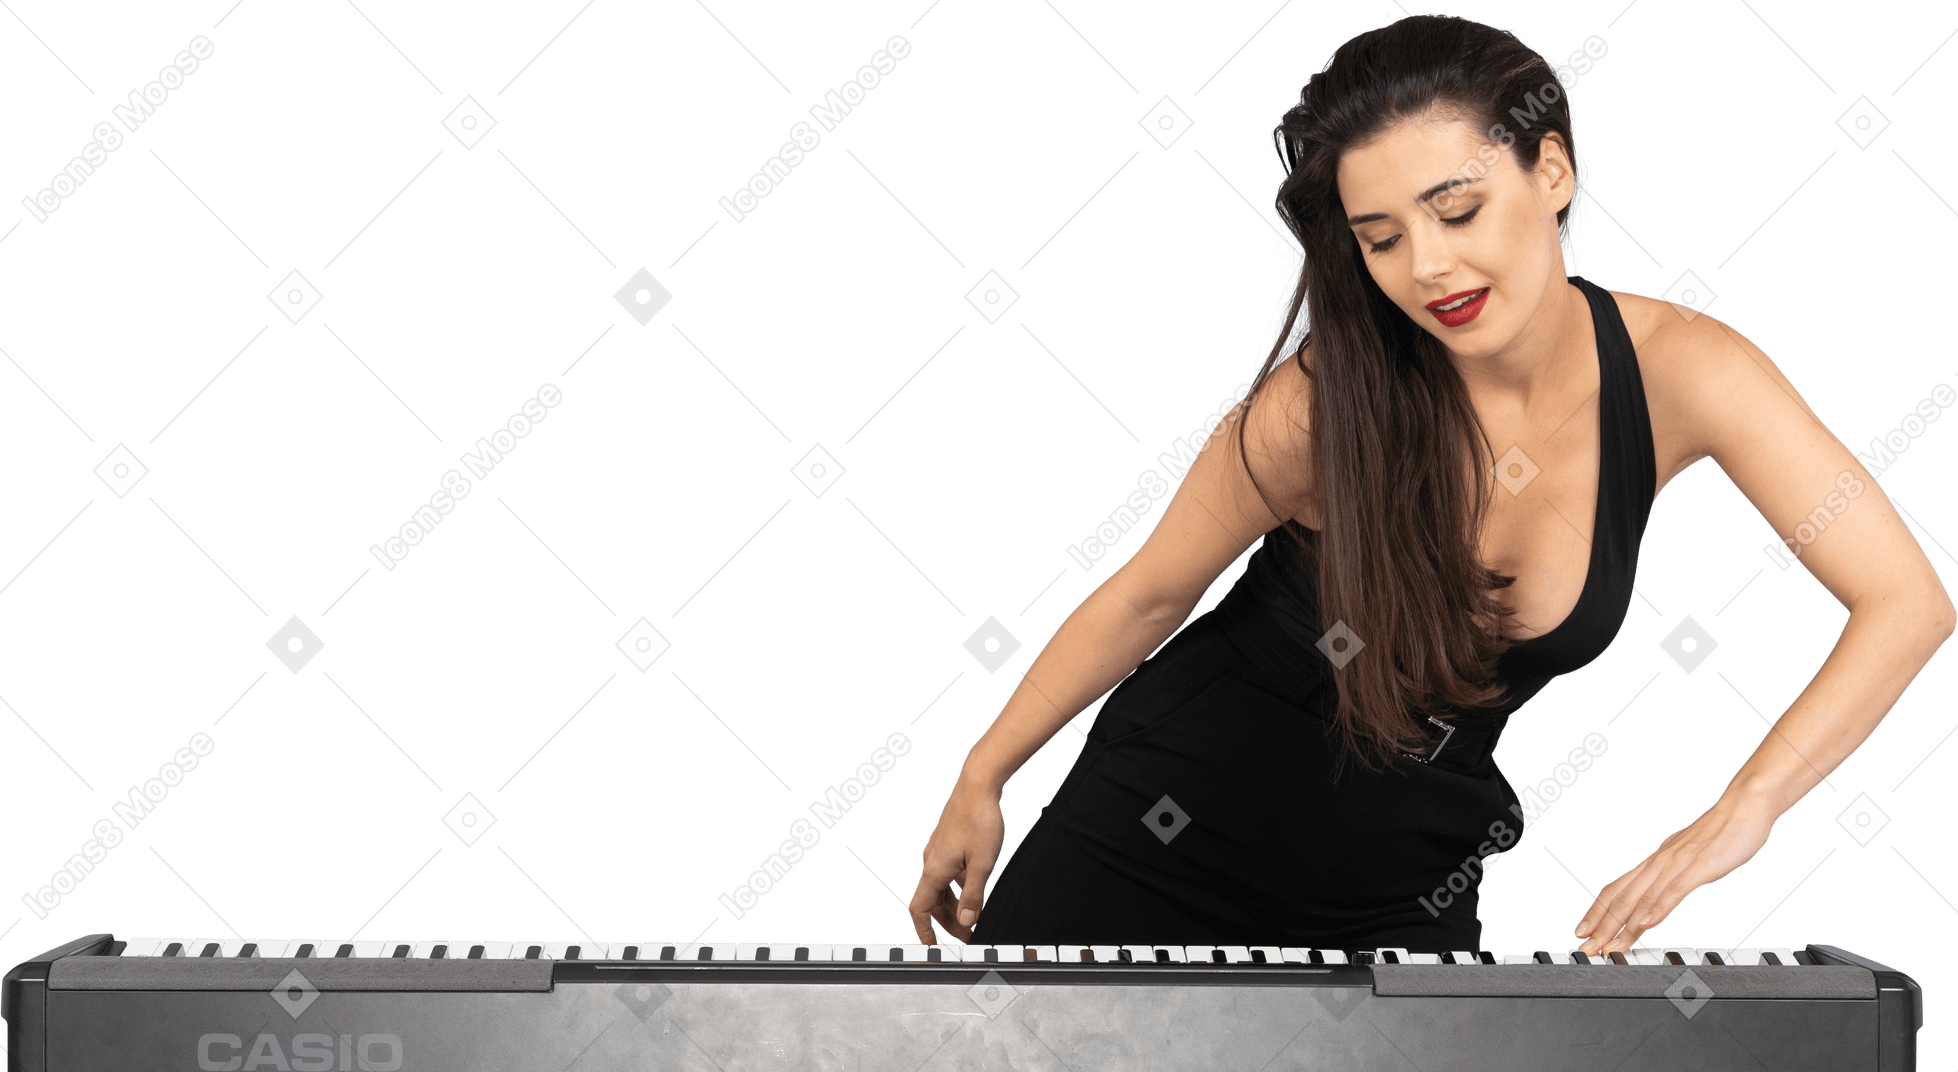 Front view of a young lady in black dress putting her hand on keyboard and leaning aside